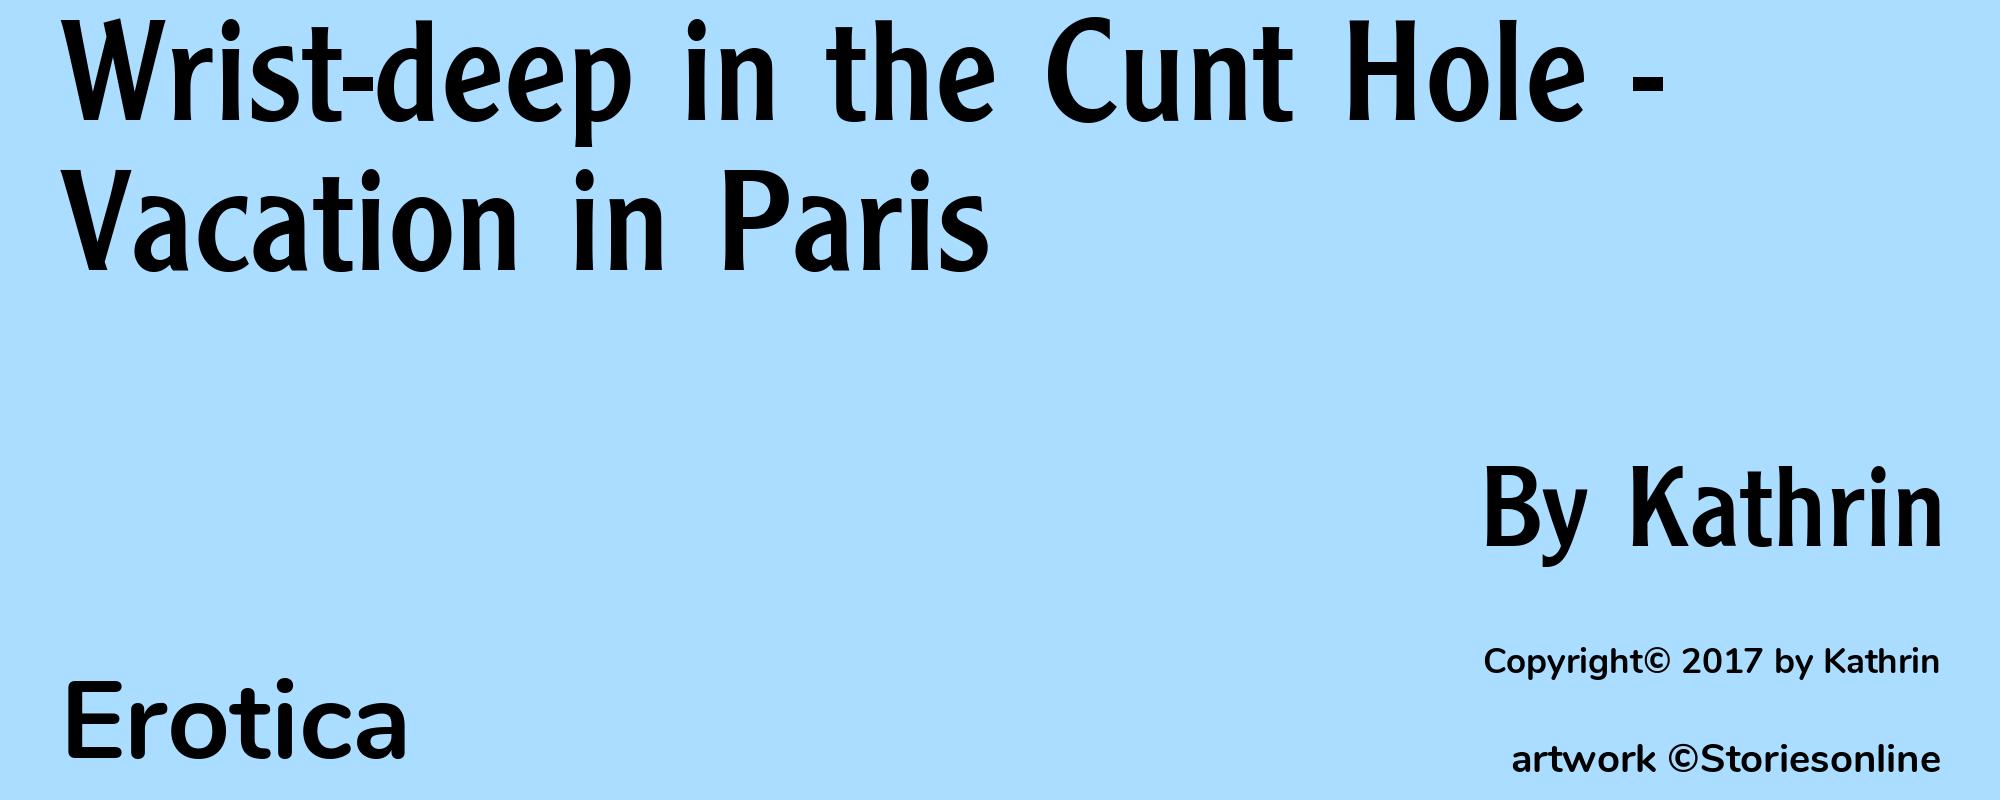 Wrist-deep in the Cunt Hole - Vacation in Paris - Cover